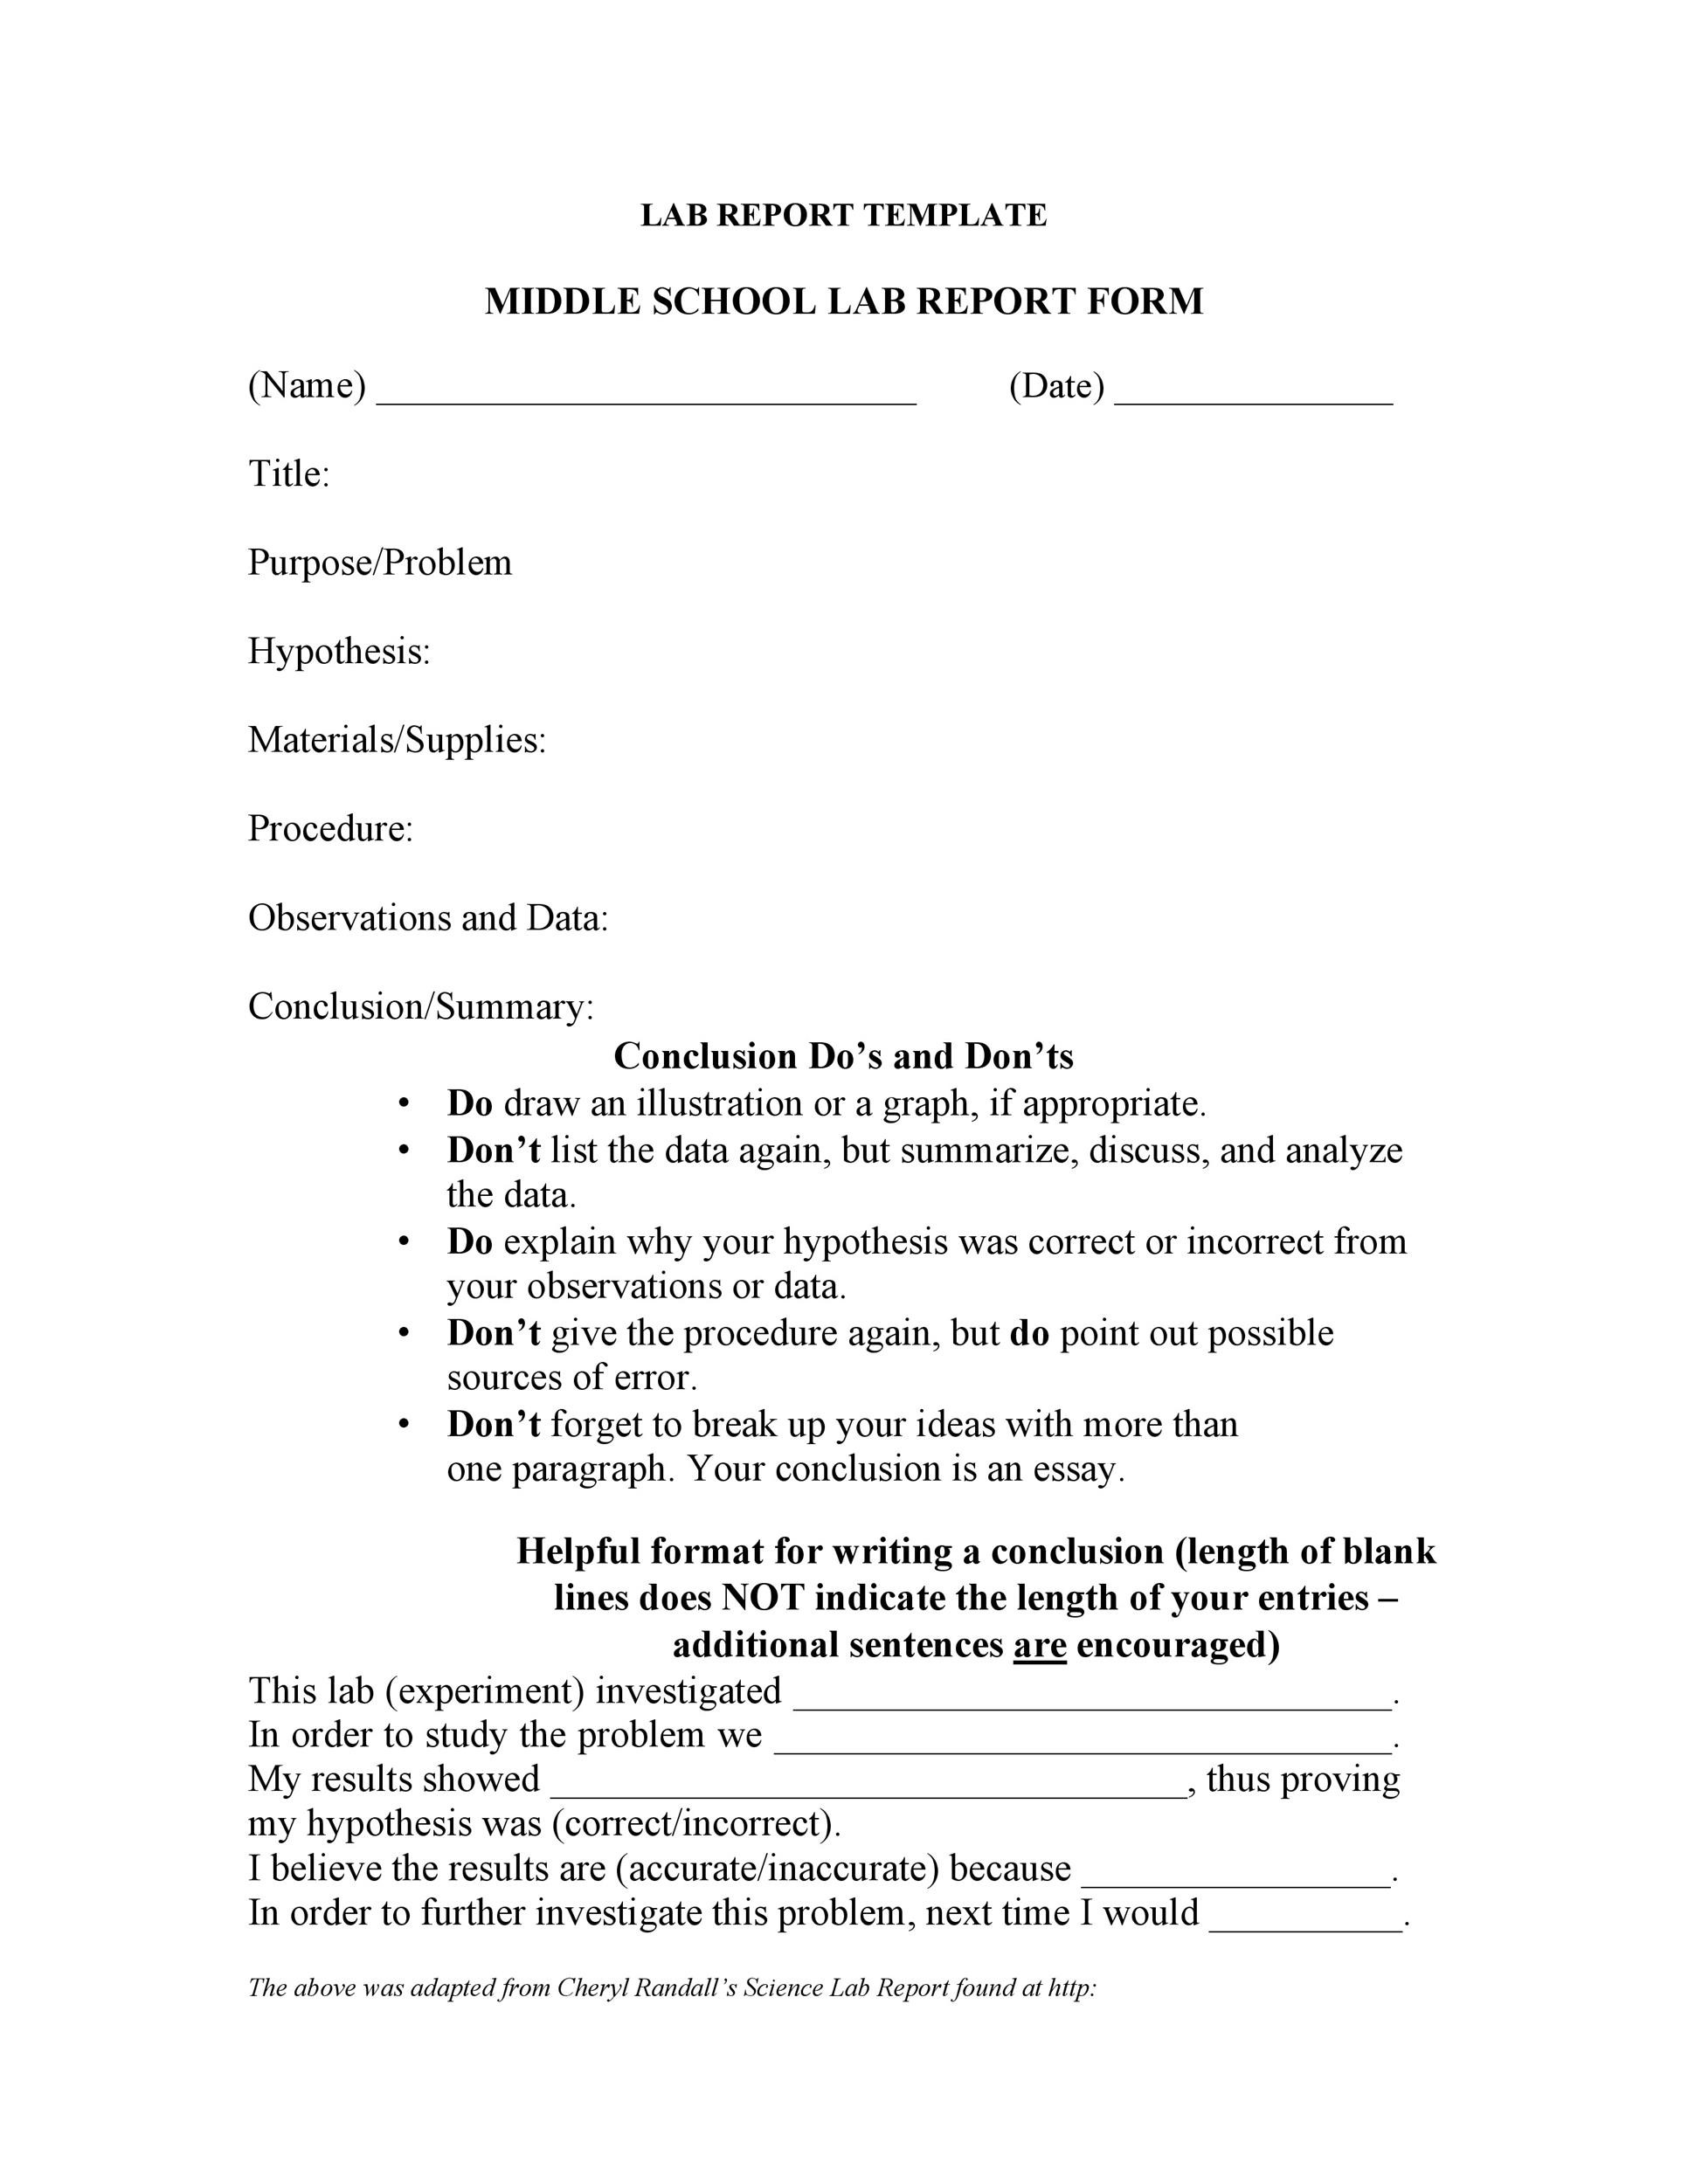 Free lab report template 25